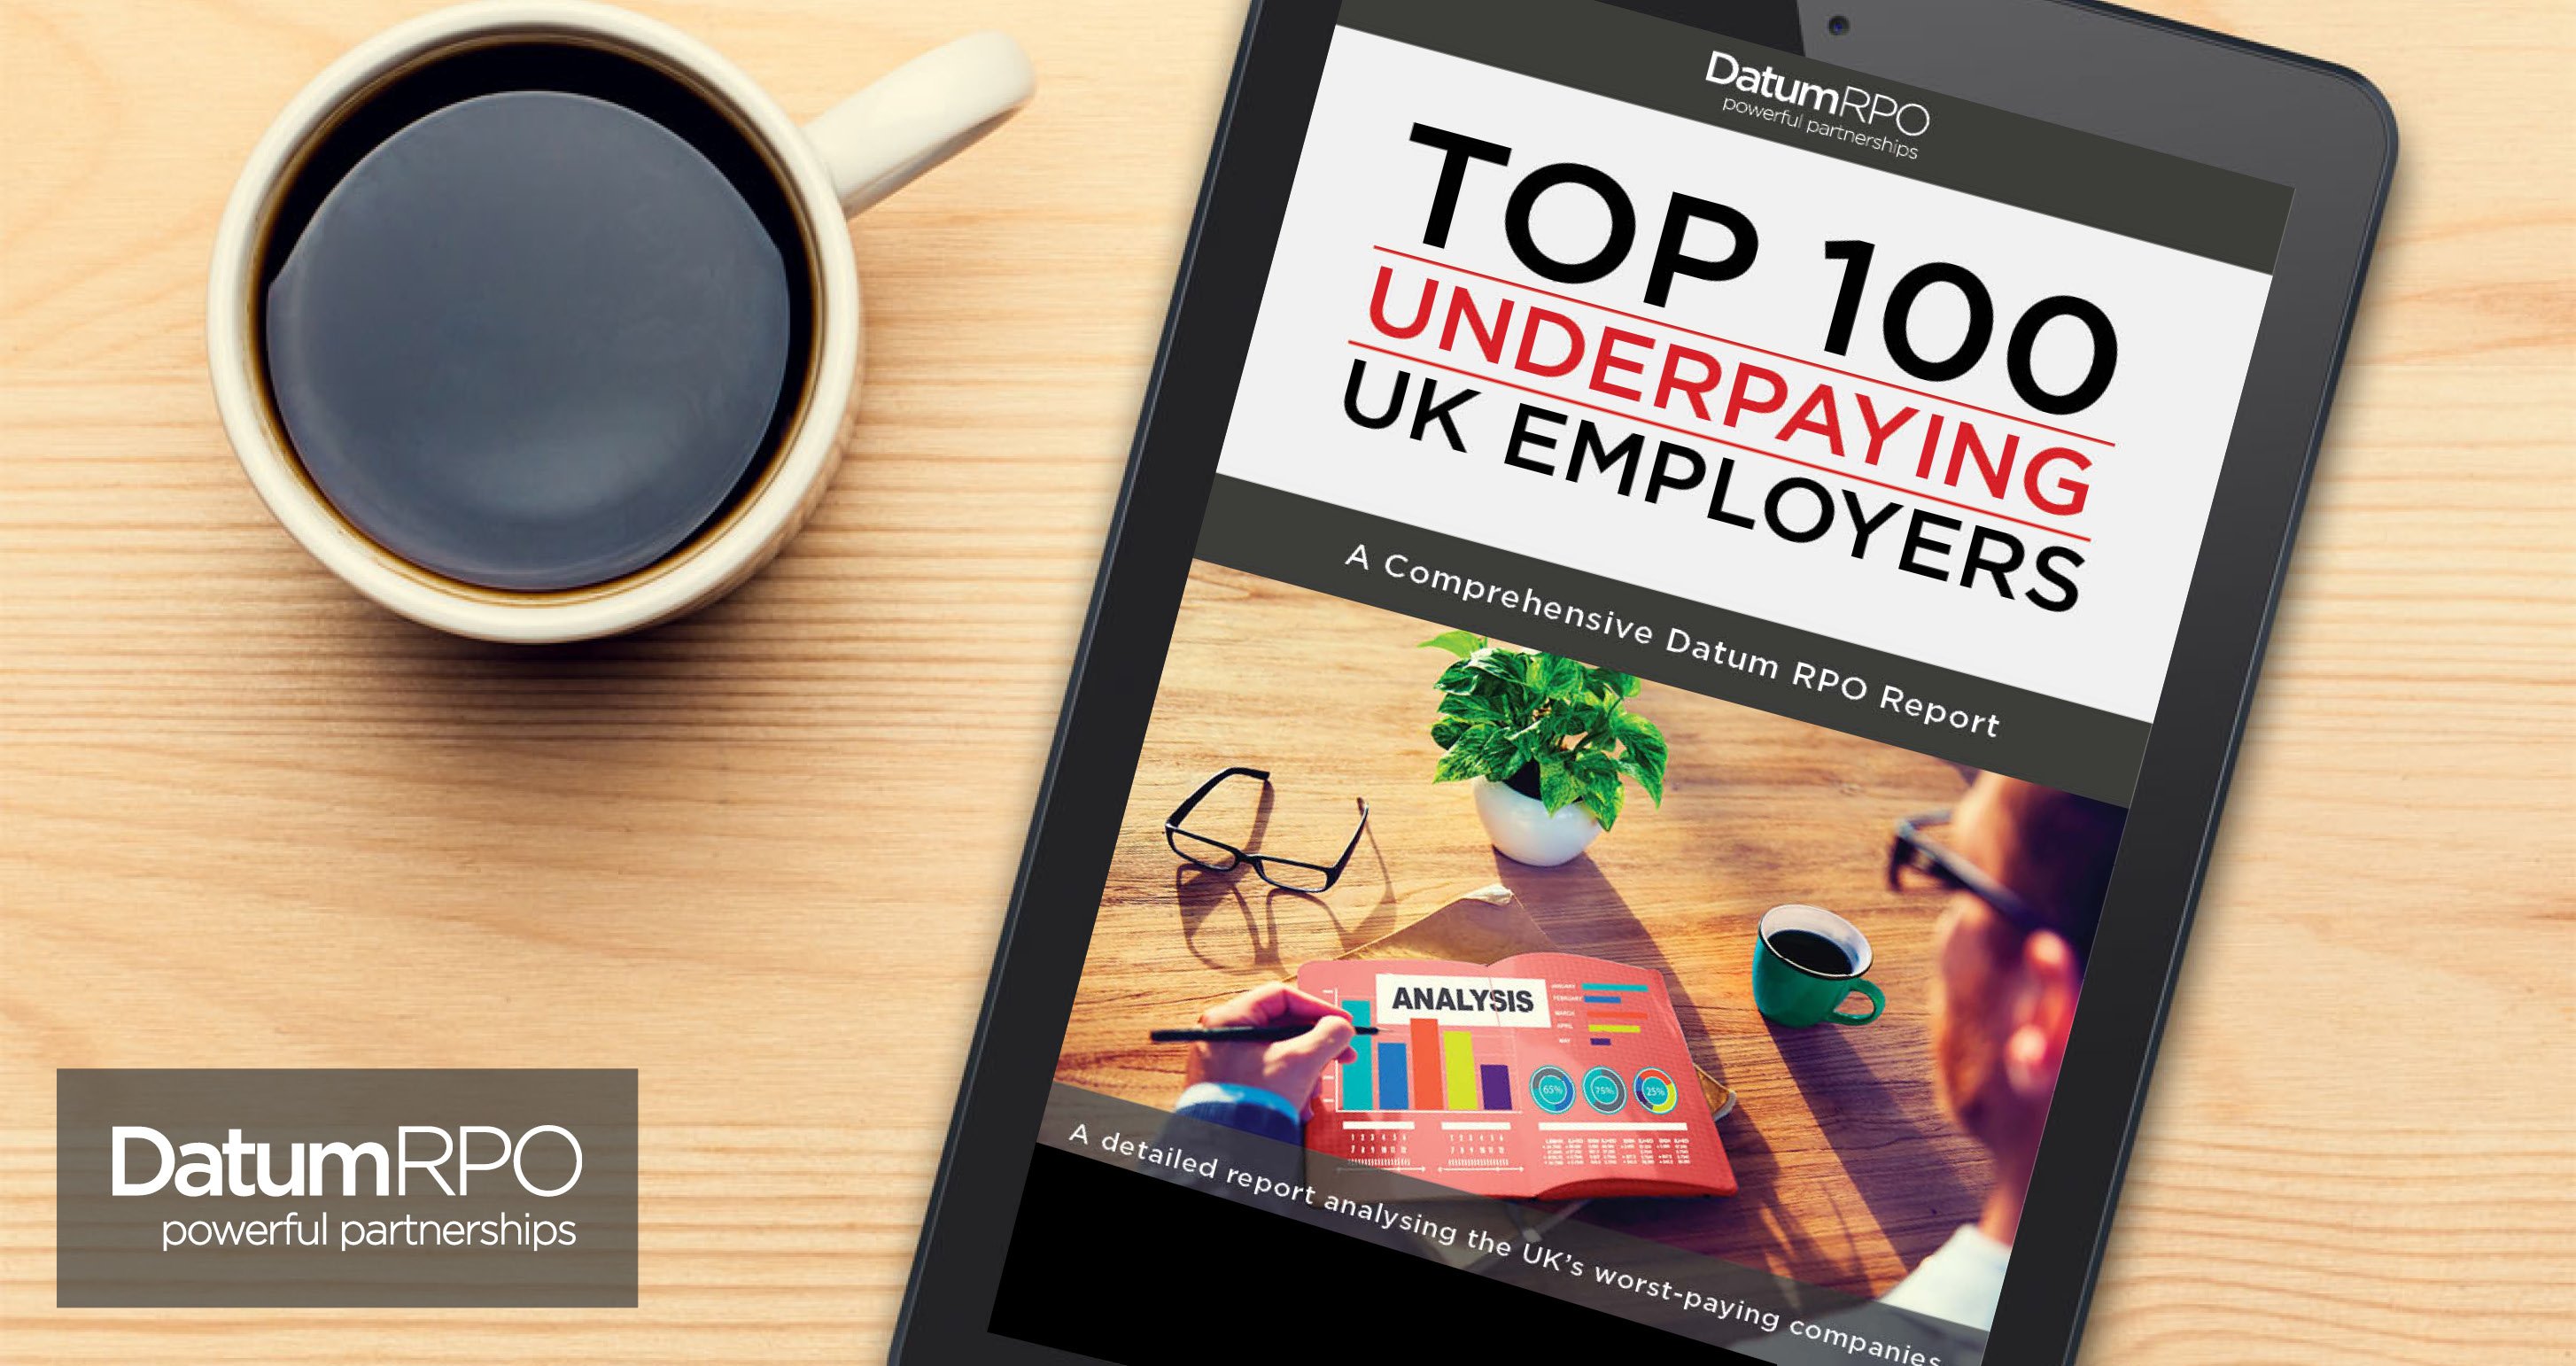 Datum Download: Top 100 Underpaying Employers